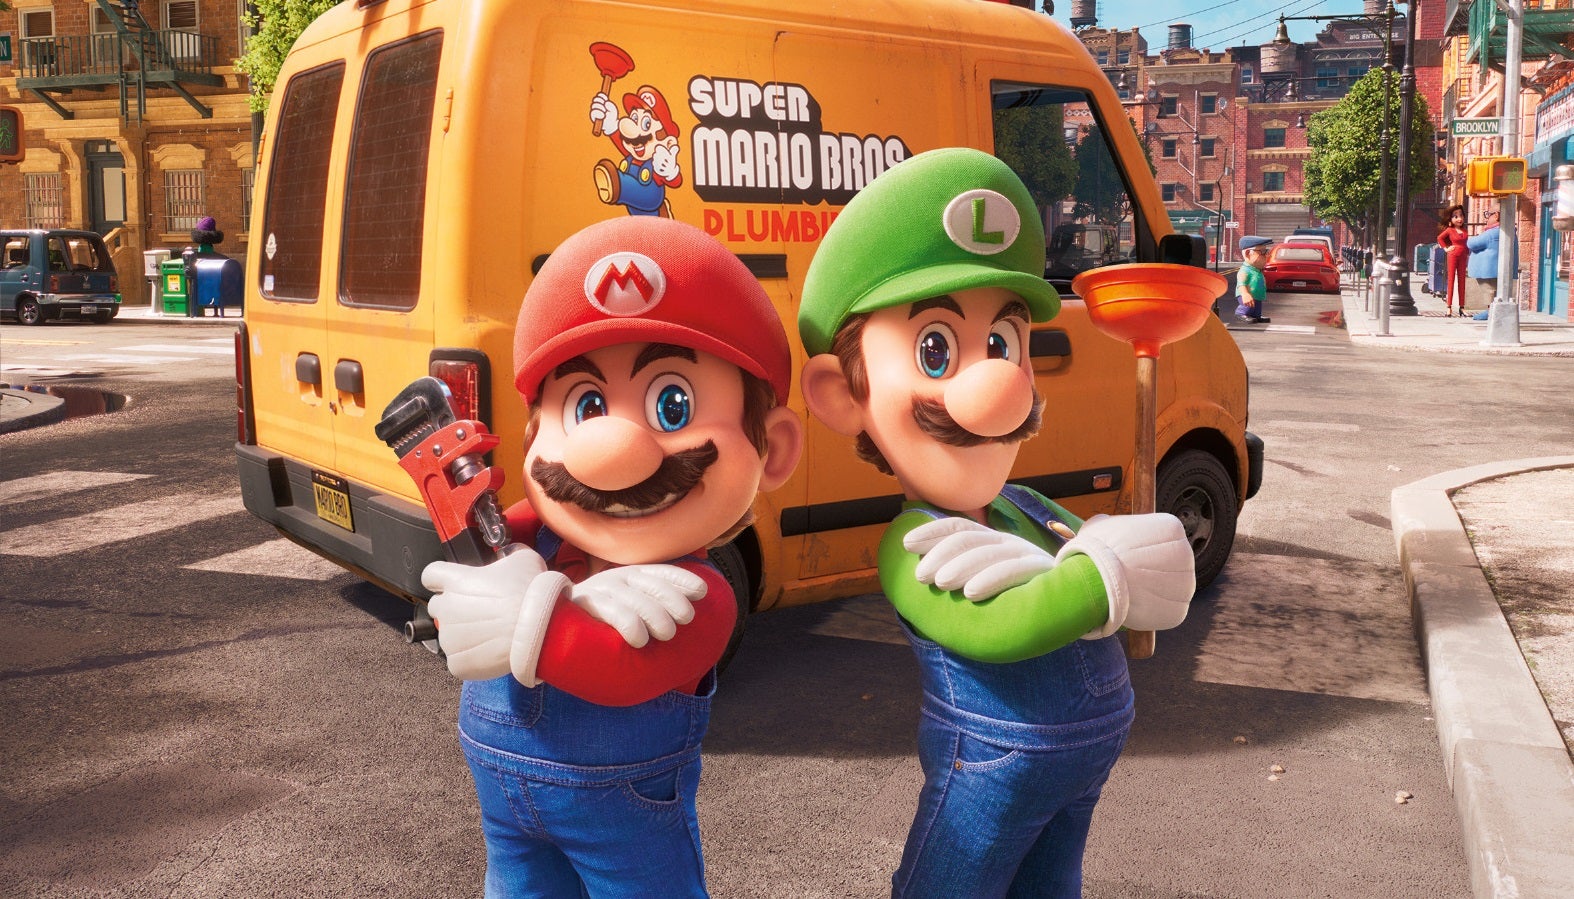 How to watch 'The Super Mario Bros. Movie' online now